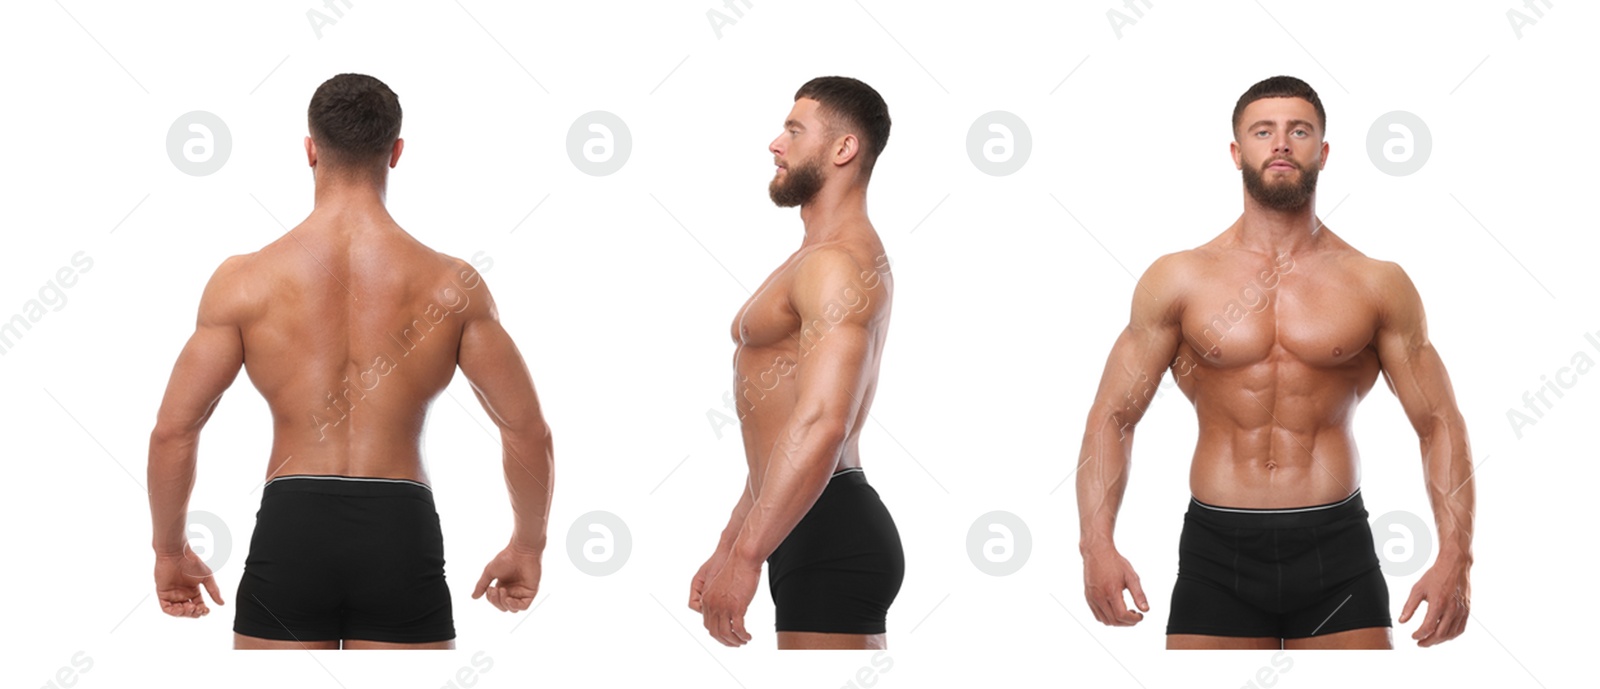 Image of Handsome bodybuilder in underwear on white background. Front, side and back photos